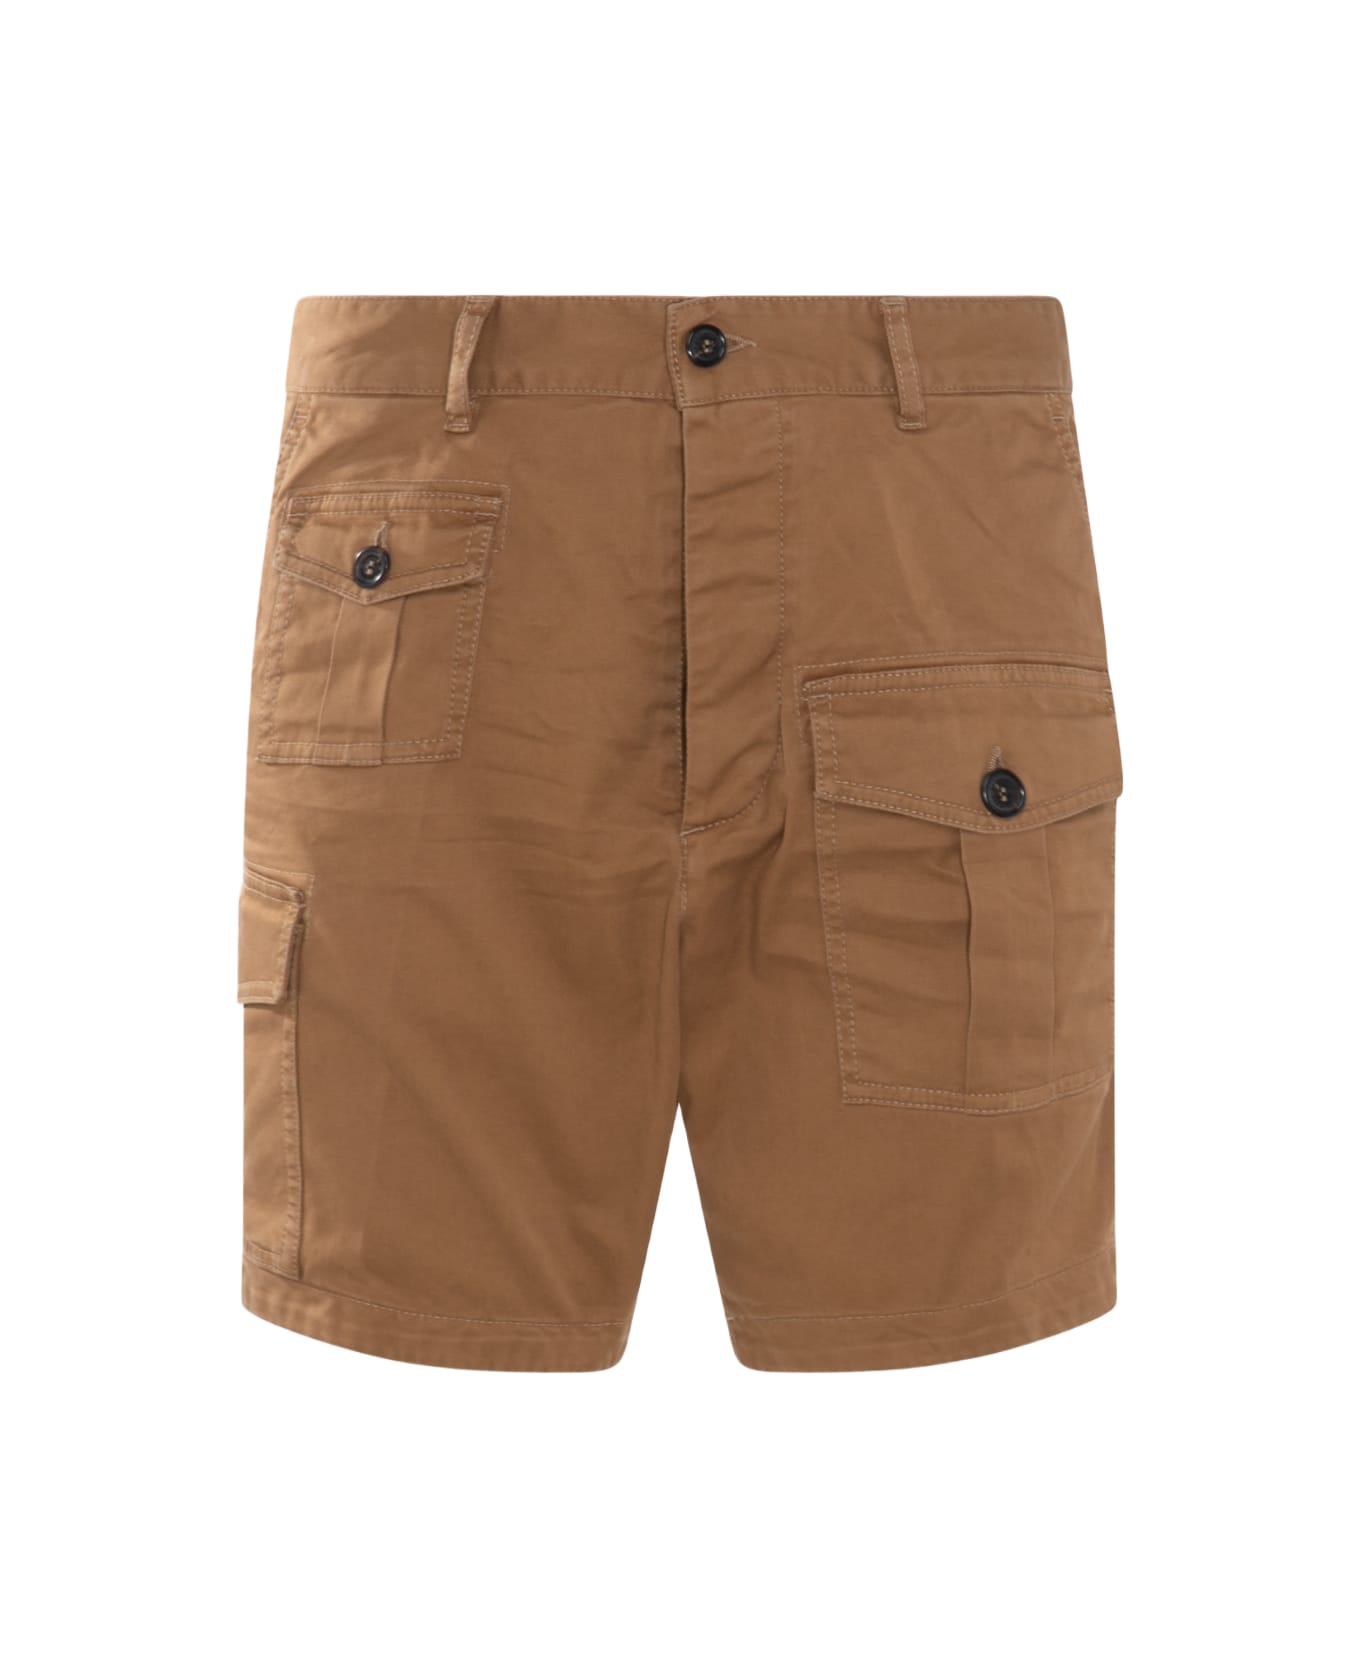 Dsquared2 Camel Cotton Shorts - Brown